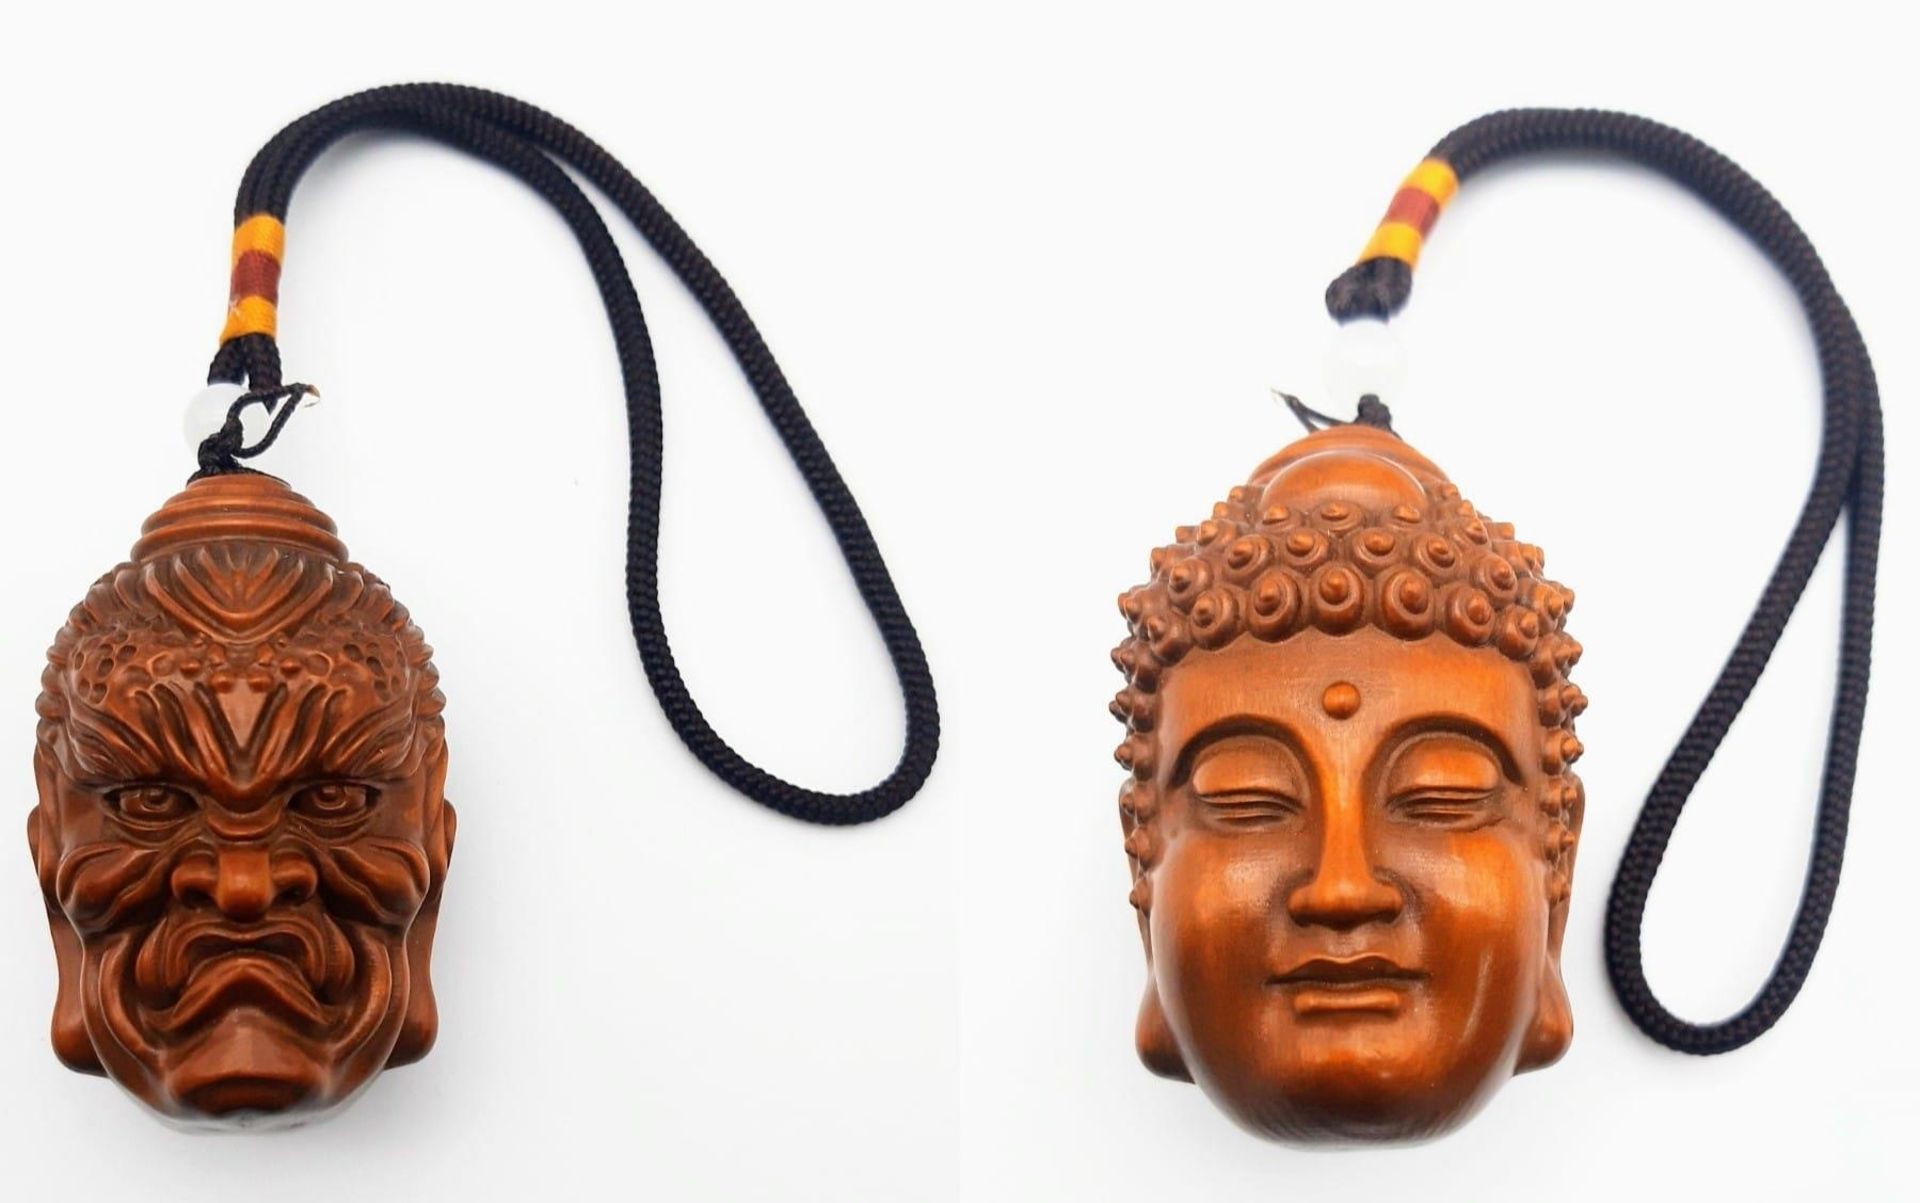 Japanese Buddhist netsuke with both GOOD and EVIL perceived as part of an antagonistic duality